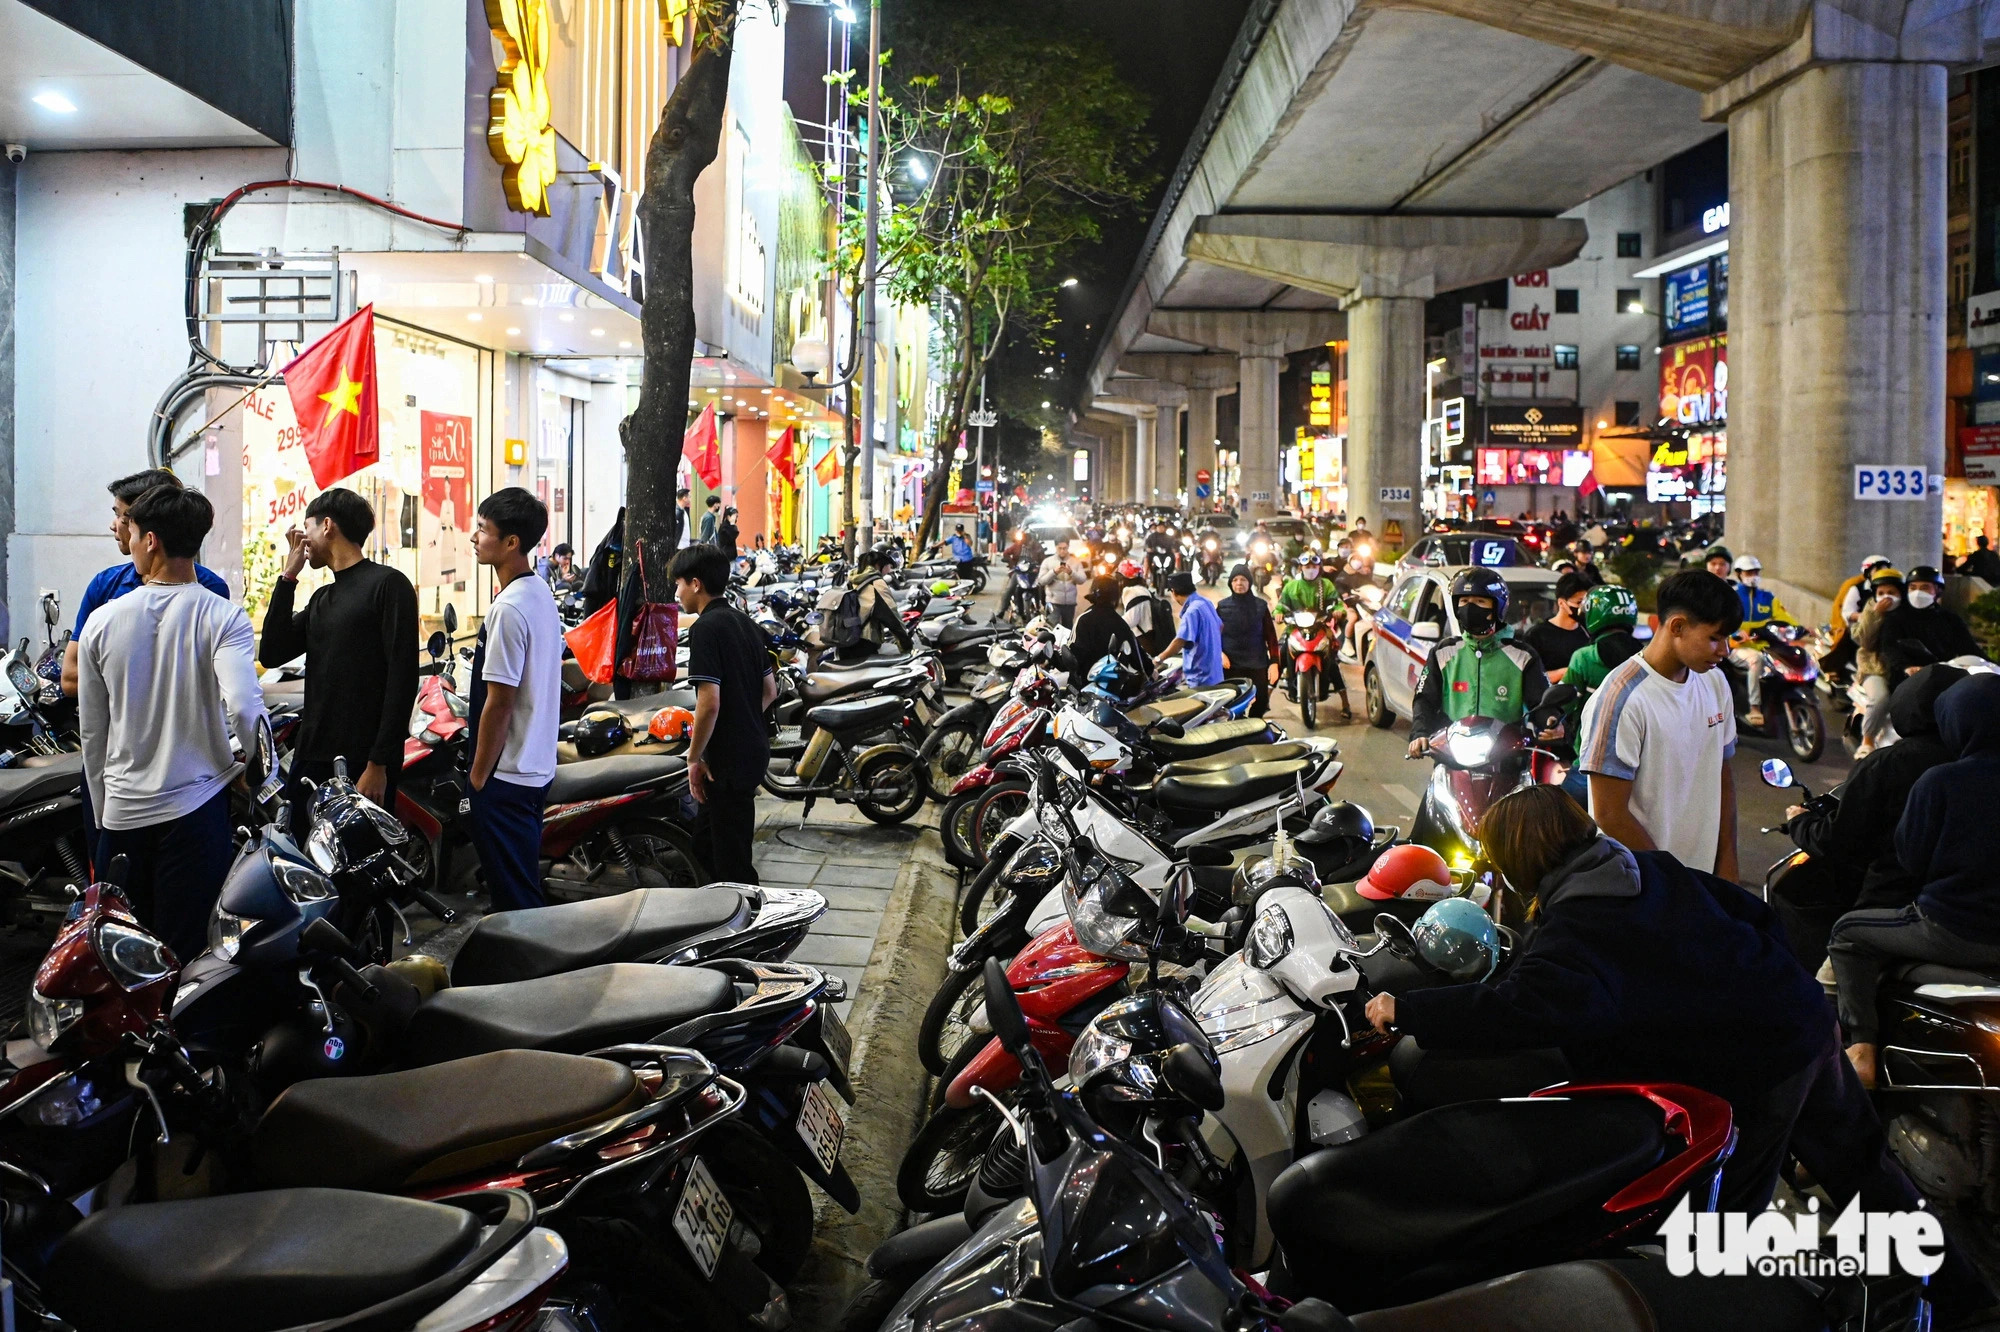 Both the sidewalks and roadsides on Cau Giay Street in Hanoi are full of vehicles amid the Tet shopping season. Photo: Hong Quang / Tuoi Tre